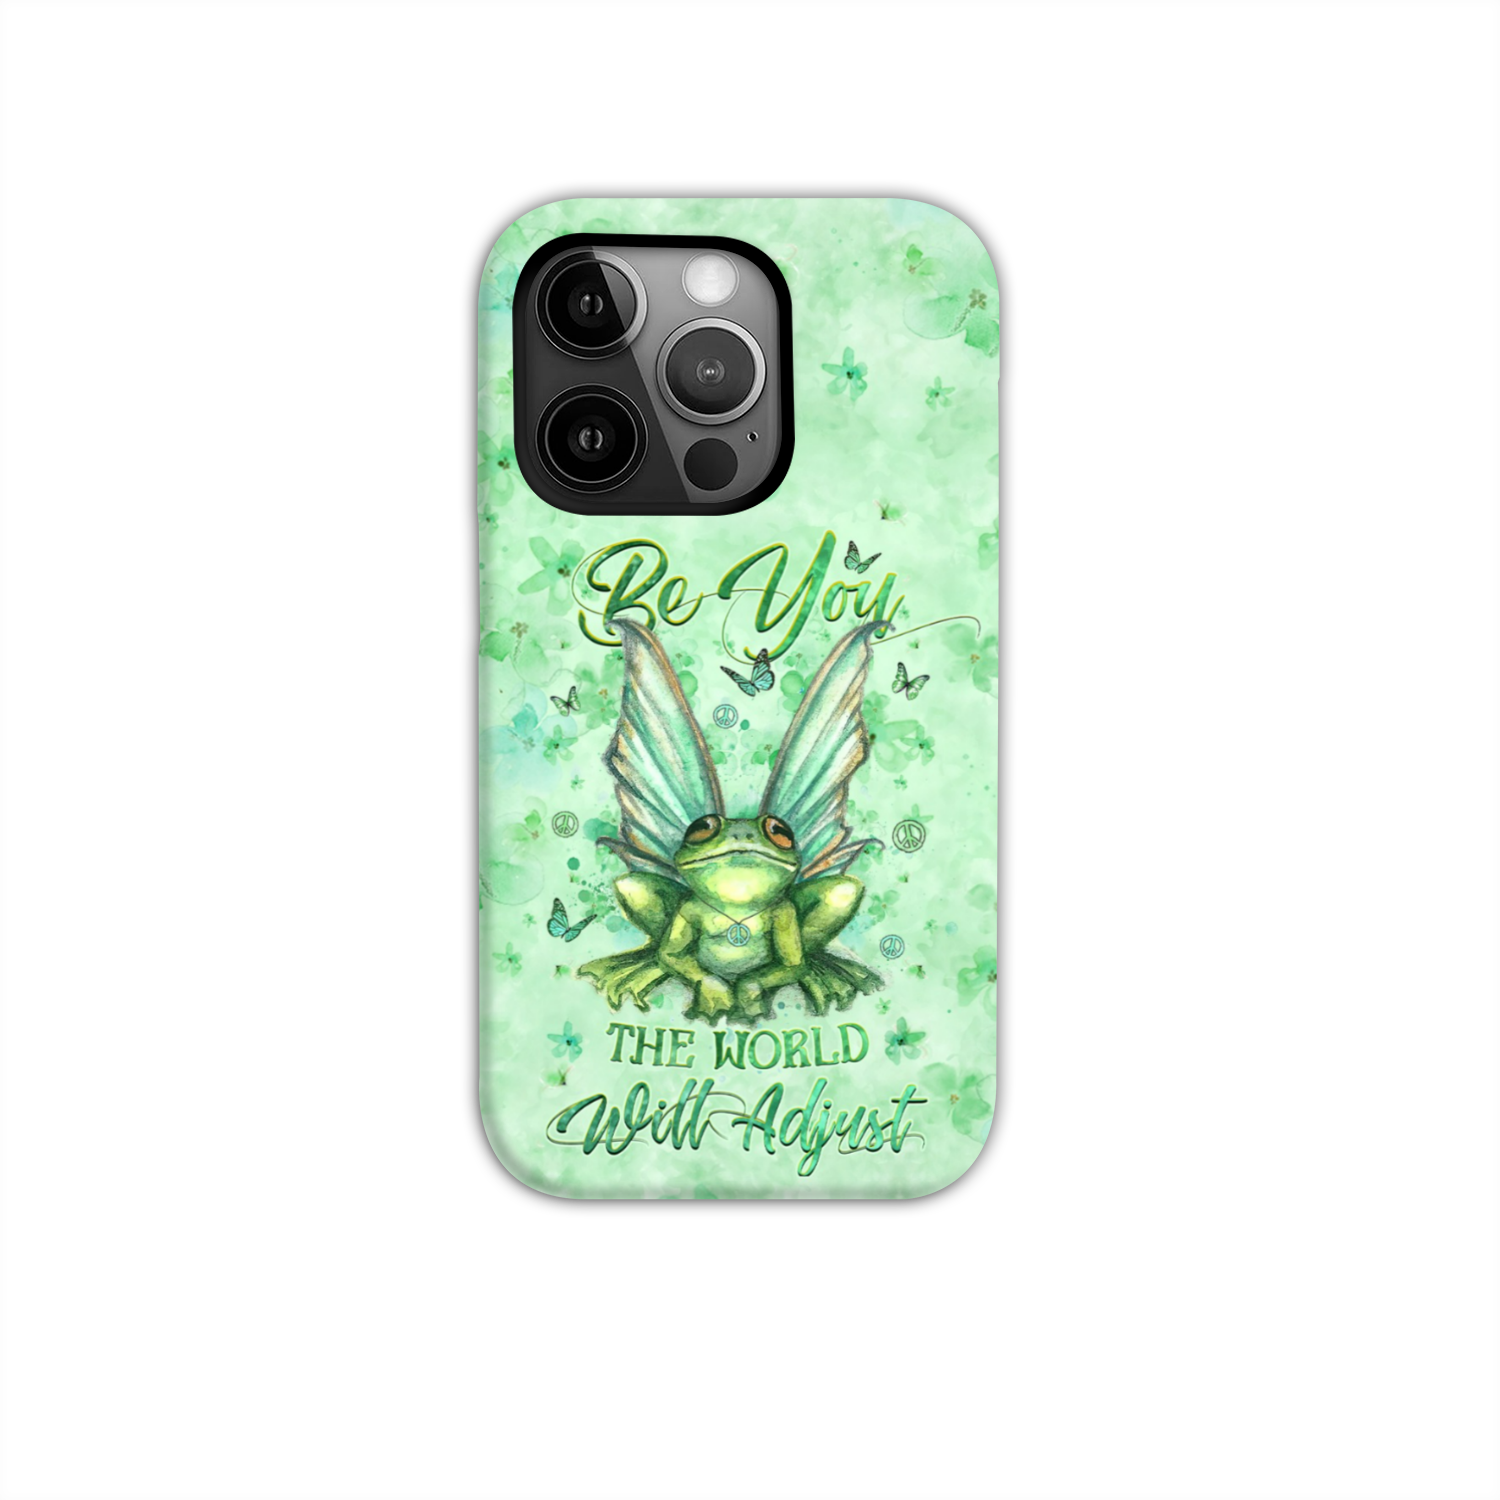 BE YOU THE WORLD WILL ADJUST PHONE CASE - YHHG2208232